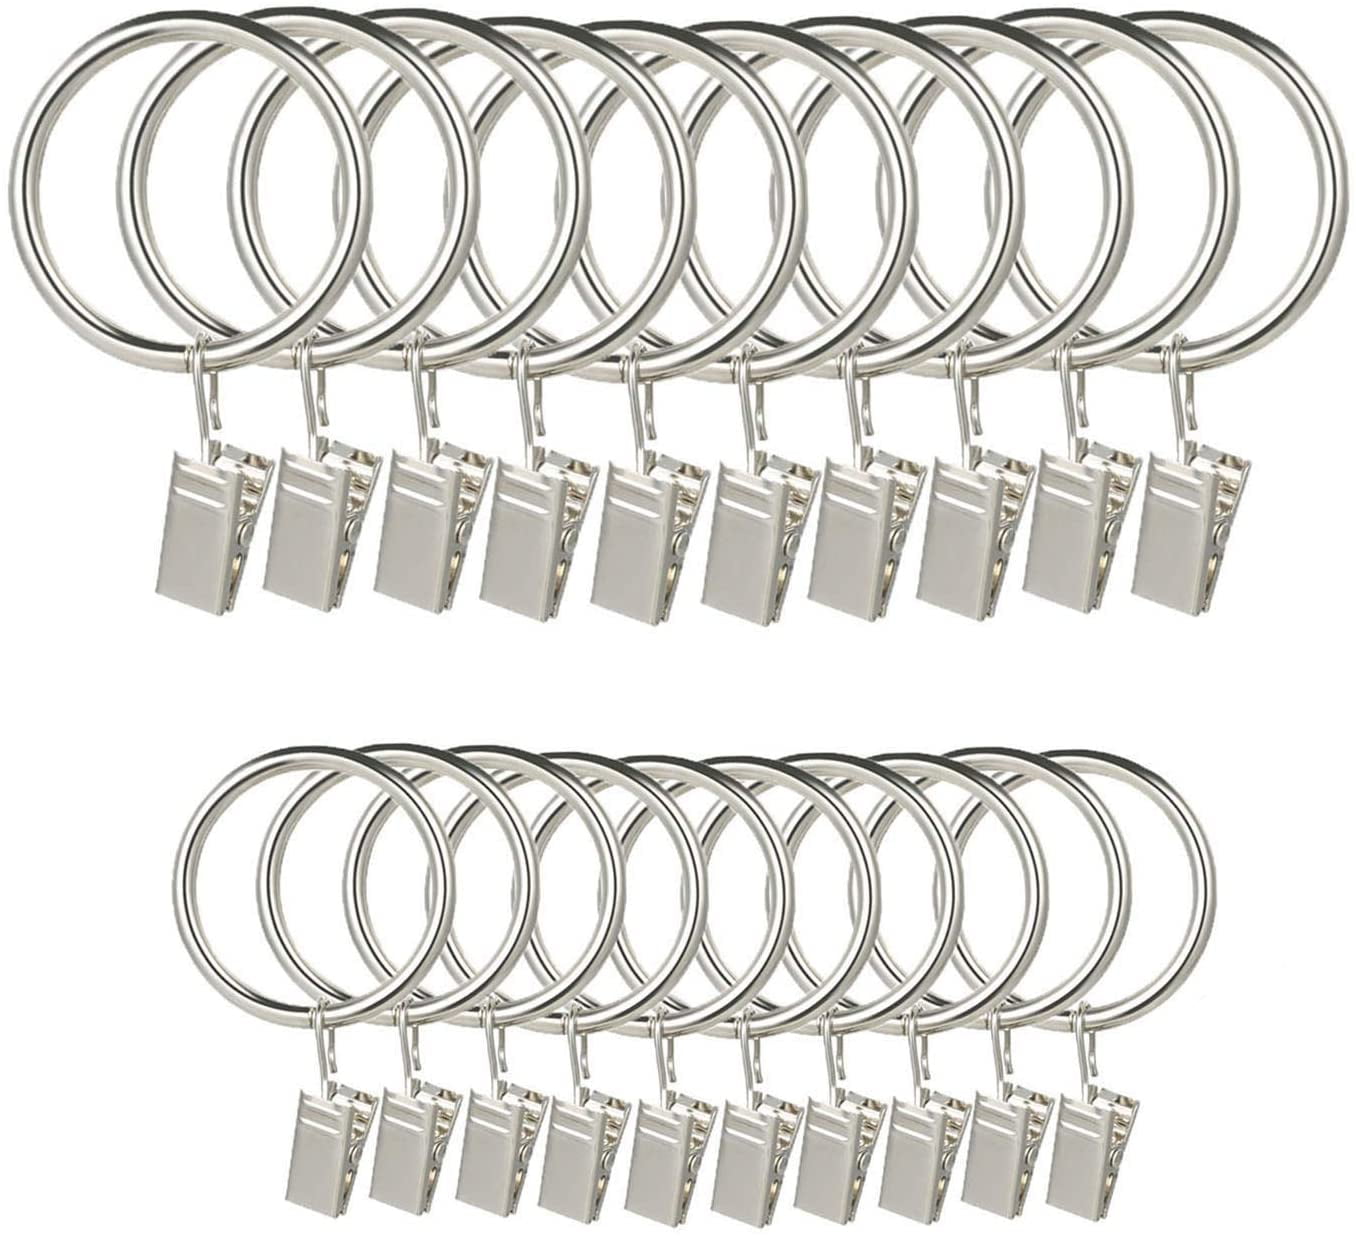 Metal Curtain Rings Hanging Hooks for Curtains Rods Pole Voile Heavy duty Rings 